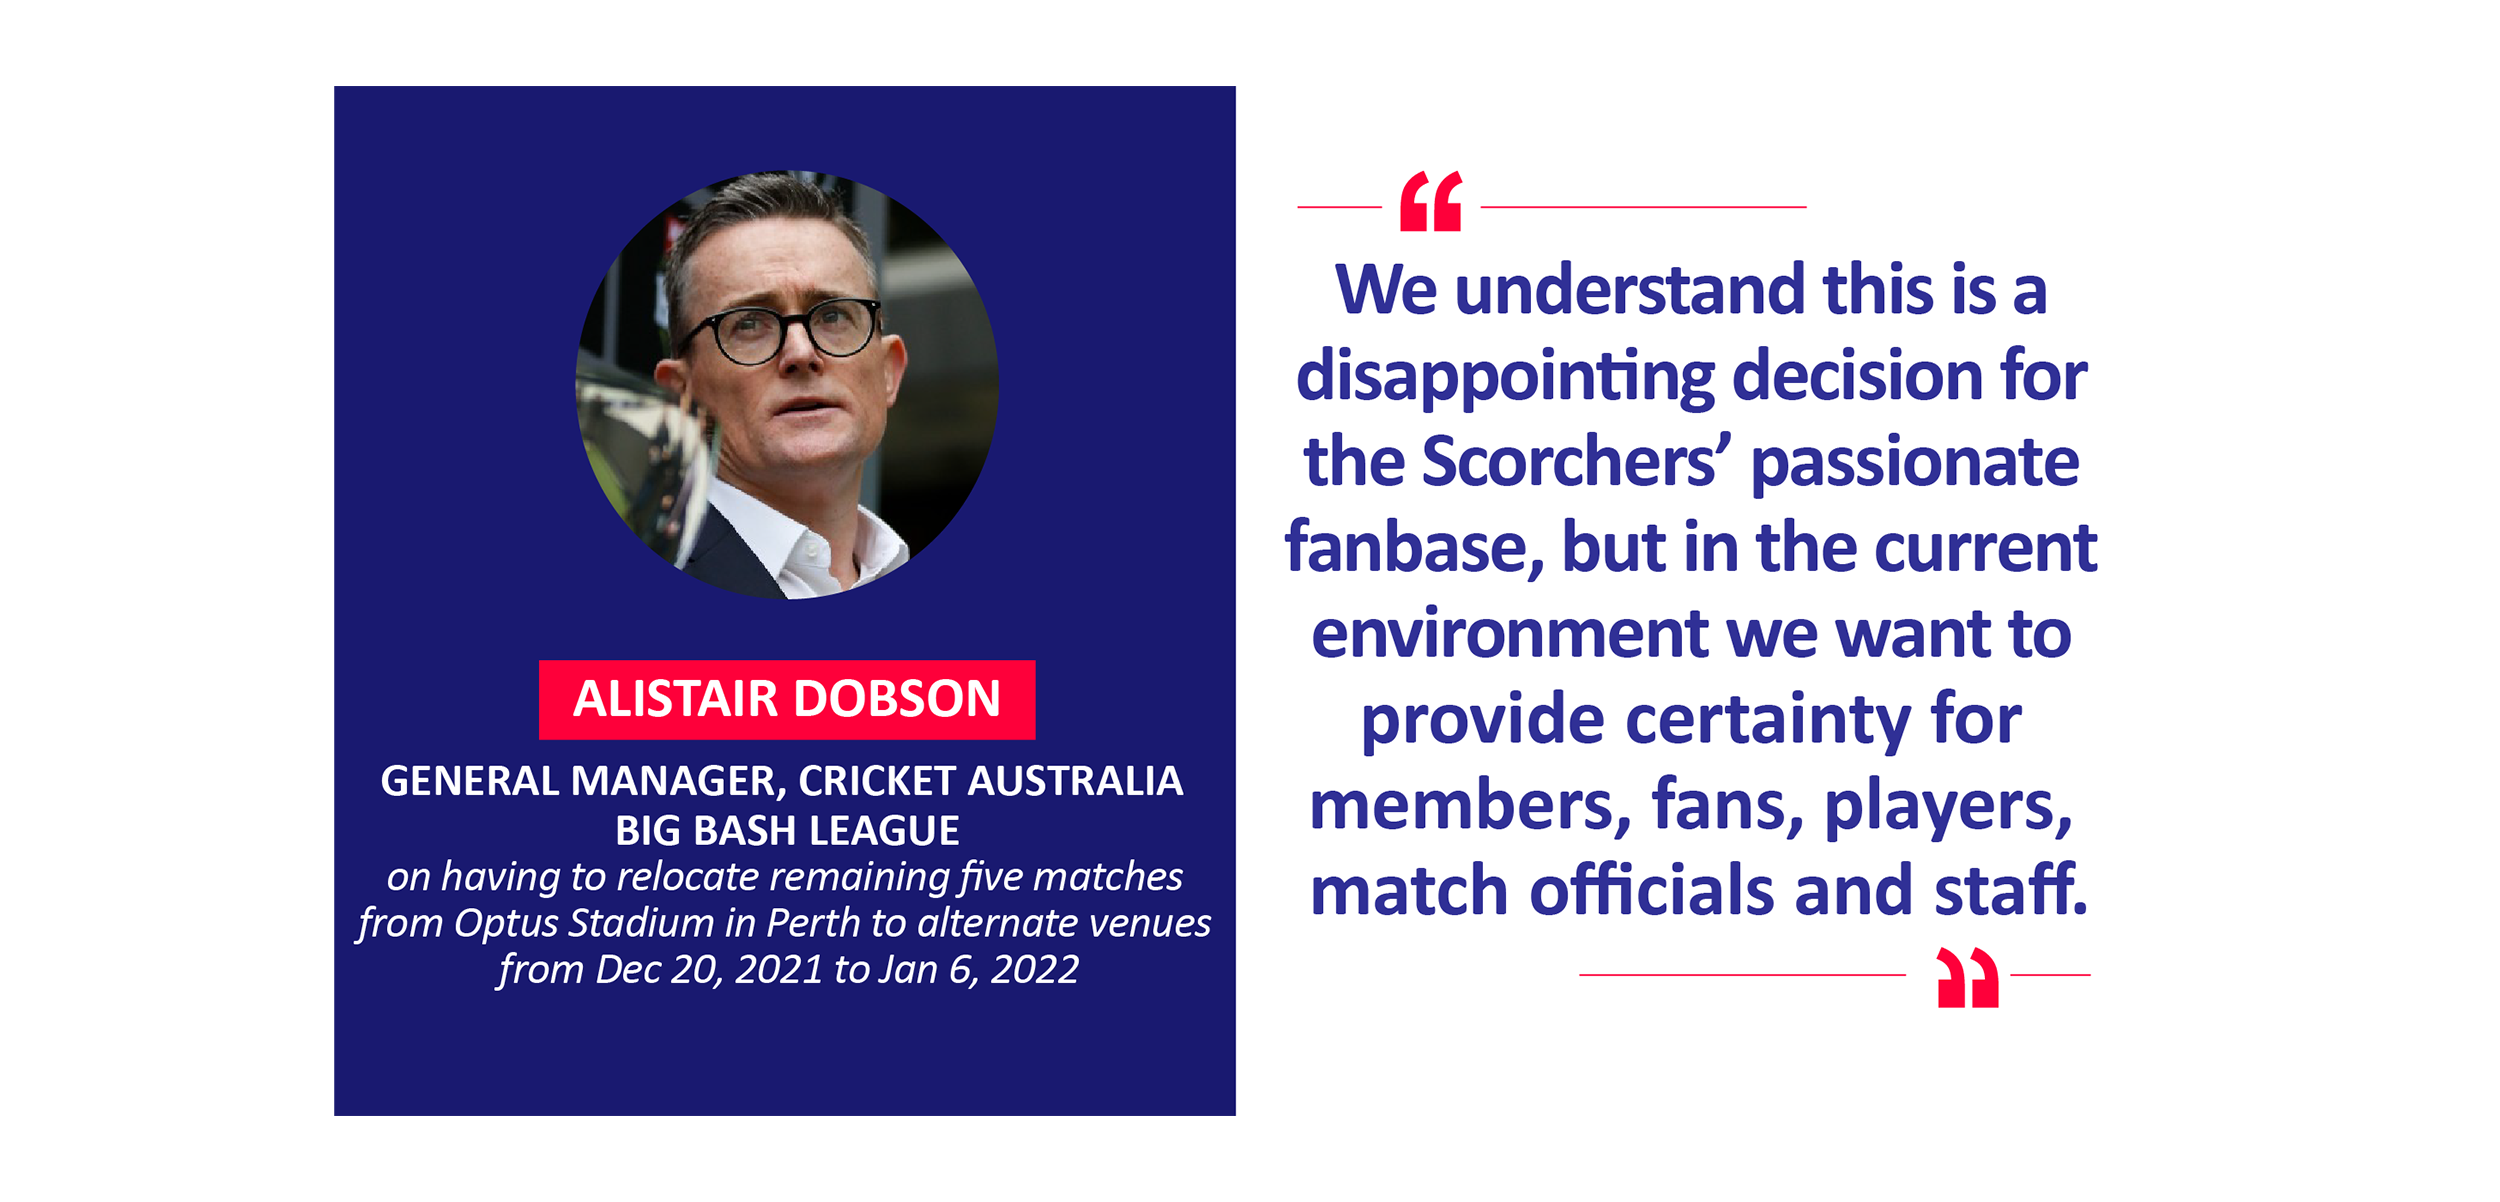 Alistair Dobson, General Manager, Cricket Australia Big Bash League on having to relocate remaining five matches from Optus Stadium in Perth to alternate venues from Dec 20, 2021 to Jan 6, 2022